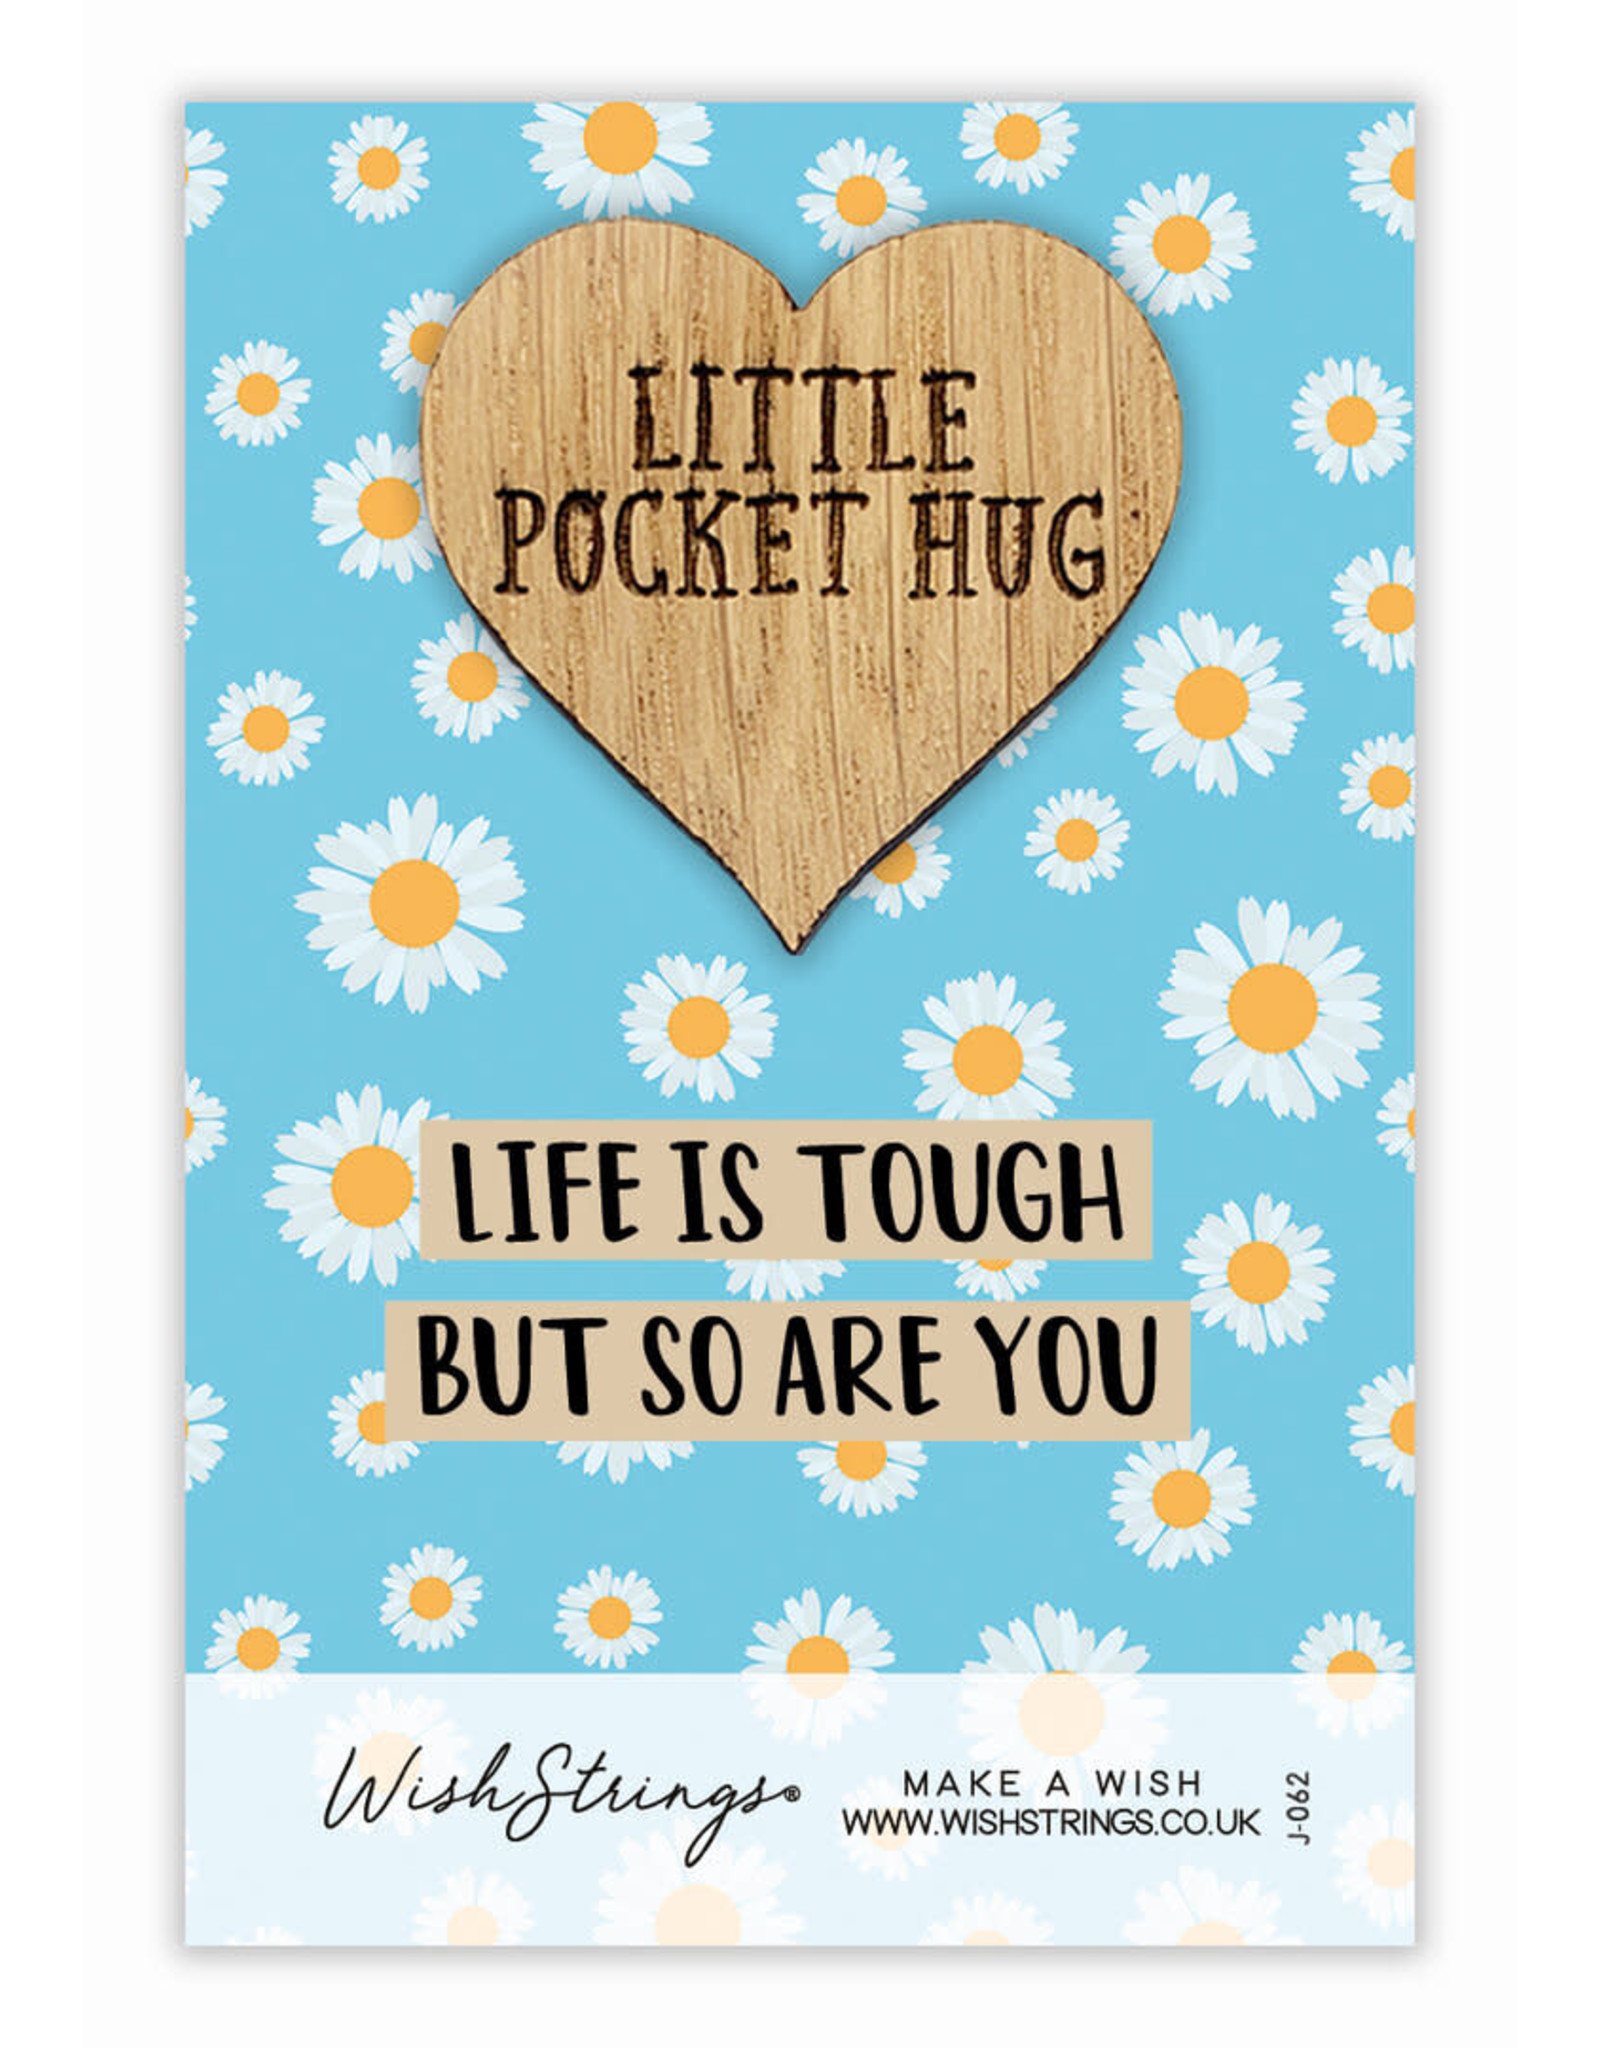 Little Pocket Hug “Life is tough but so are you”